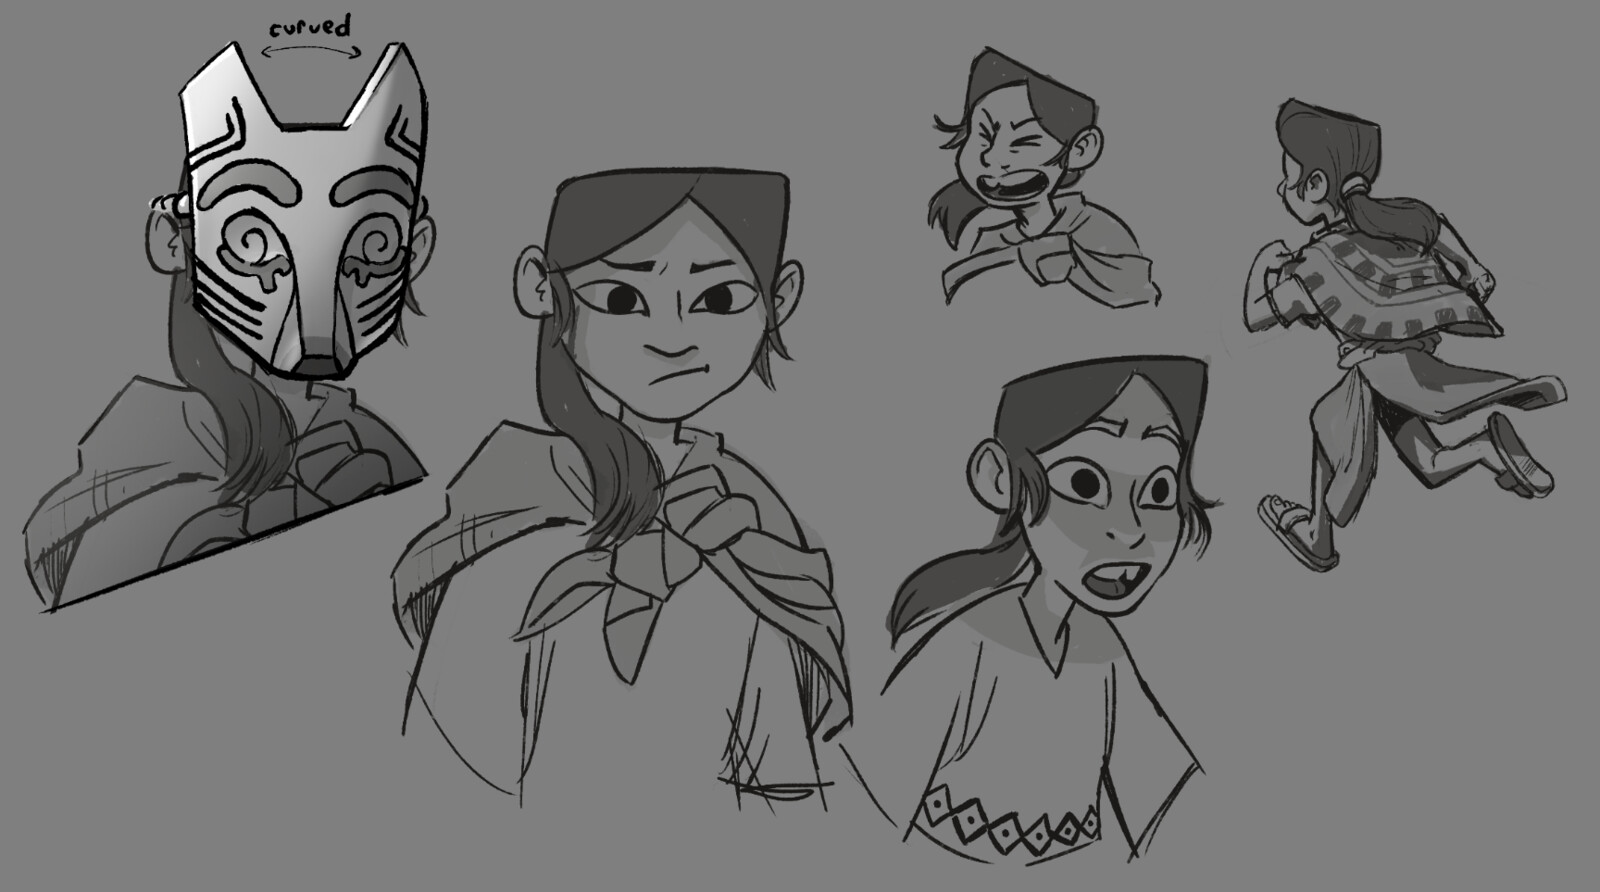 First sketches of the redesign, I wanted to draw the girl's face underneath to help with the personality of the design. Mask way too angular. 